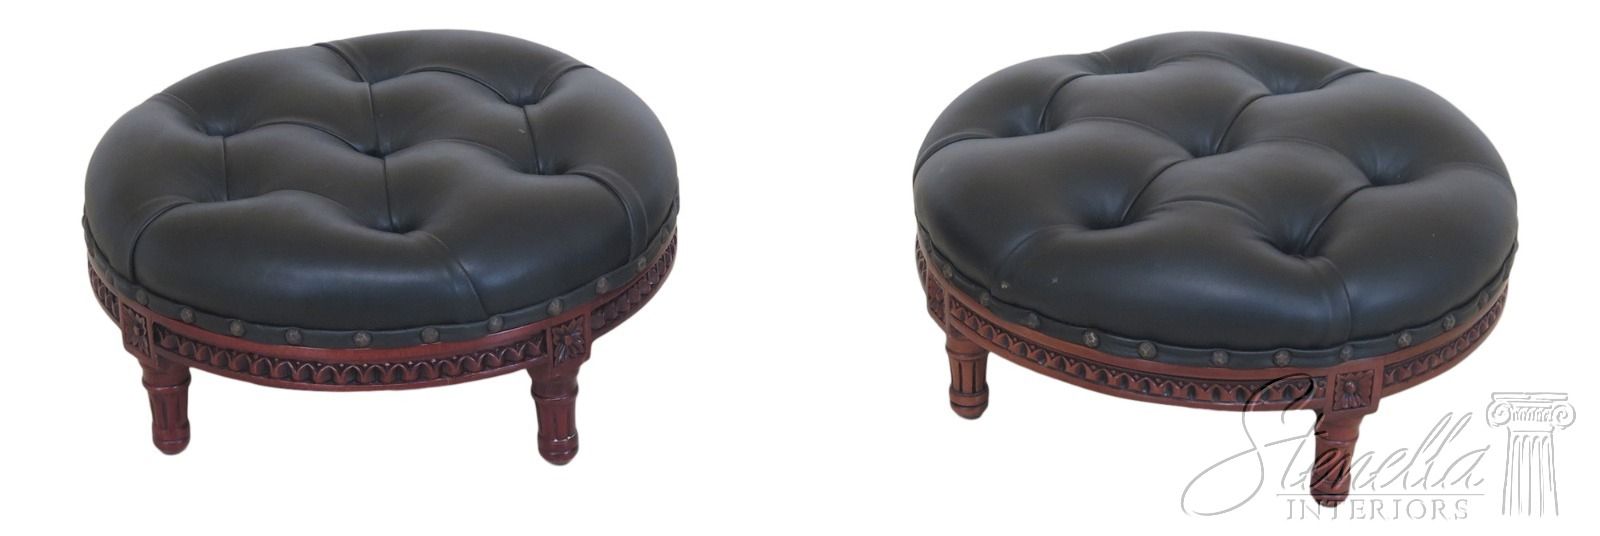 F31341ec: Pair Round Tufted Black Leather Ottoman Or Stools With Regard To Black Leather And Bronze Steel Tufted Ottomans (View 15 of 20)